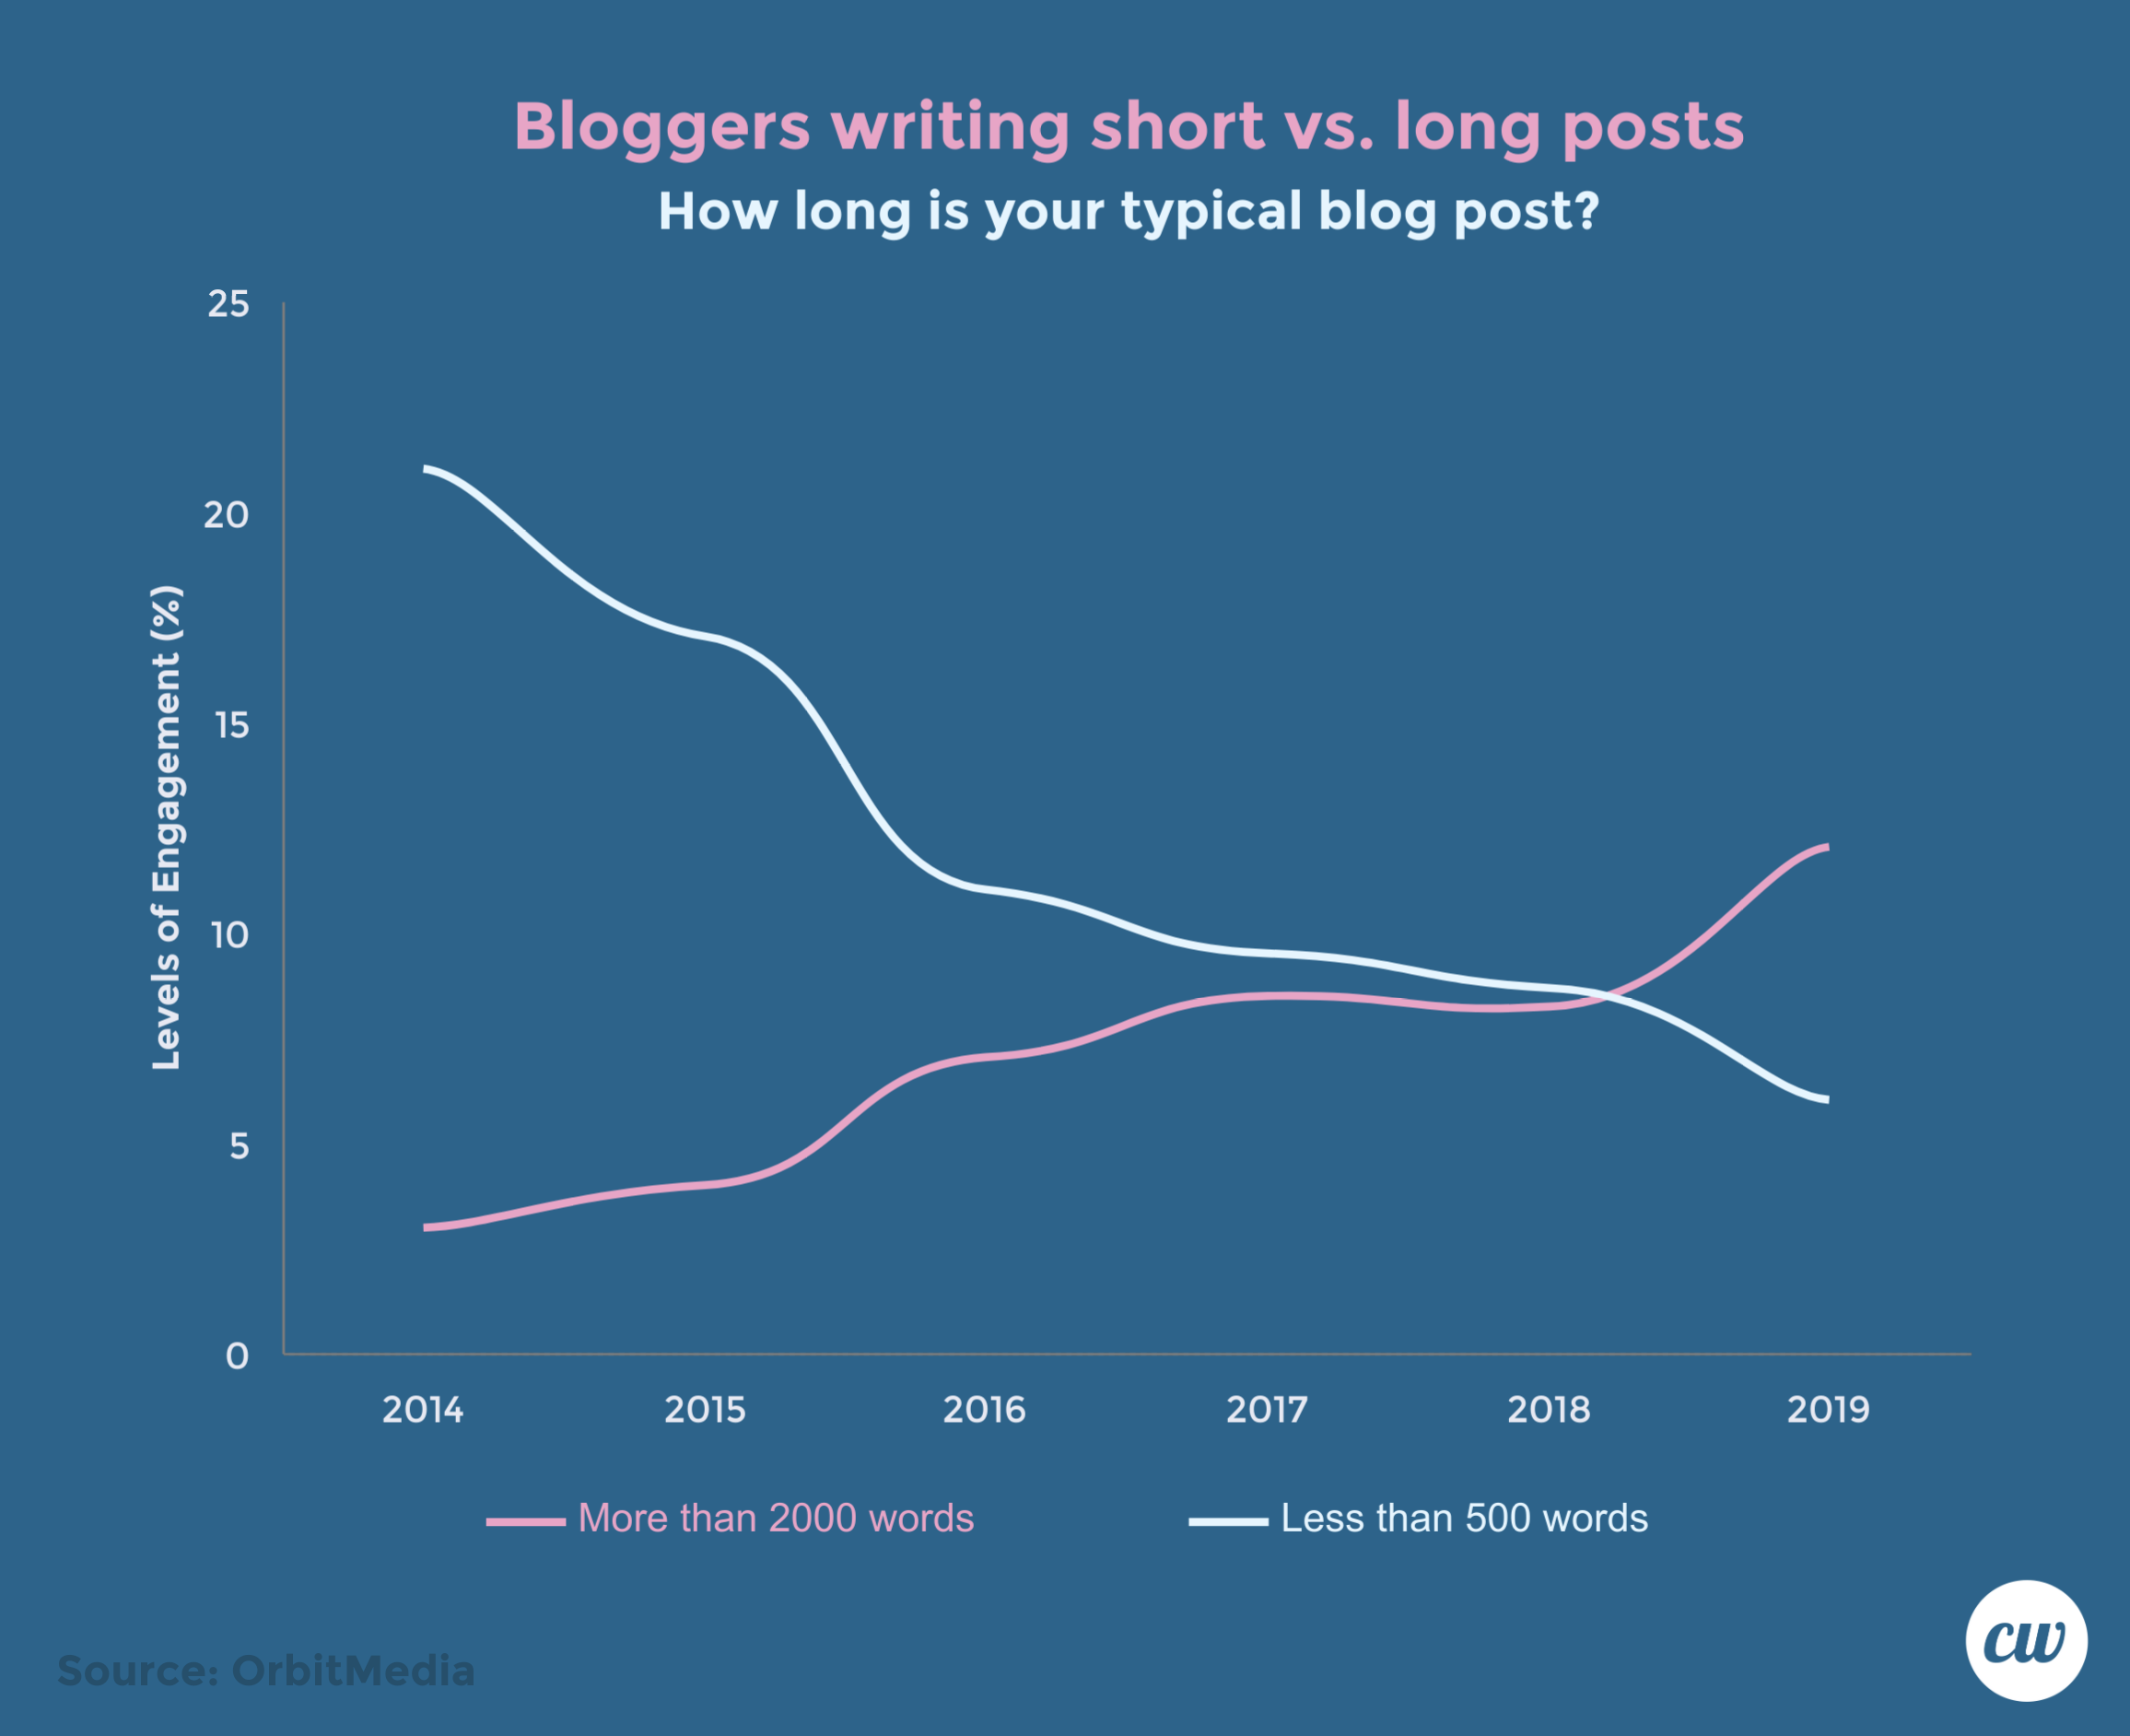 Line graph by Orbit Media proving that bloggers who write longer content are far more likely to report success.

Source: OrbitMedia.com